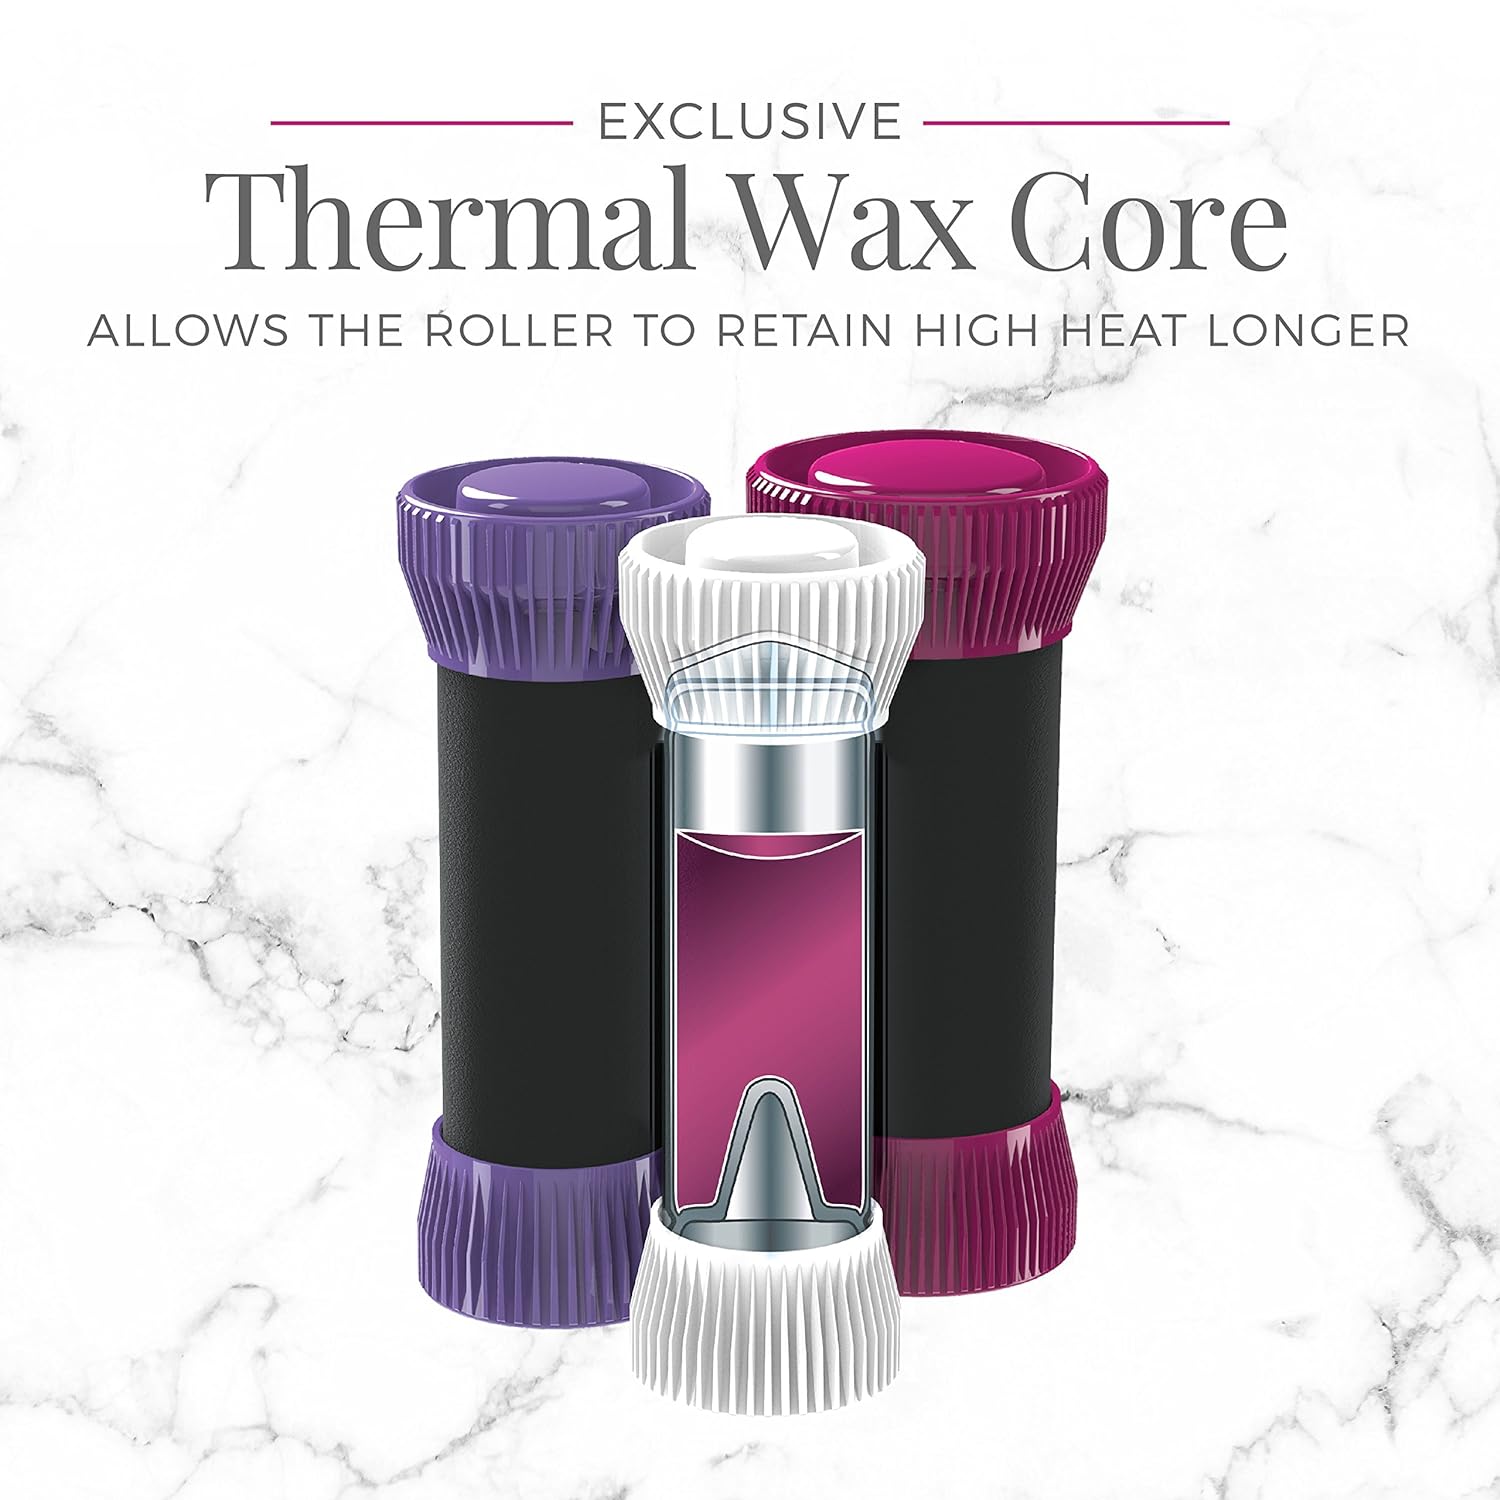 Thermal Wax Core